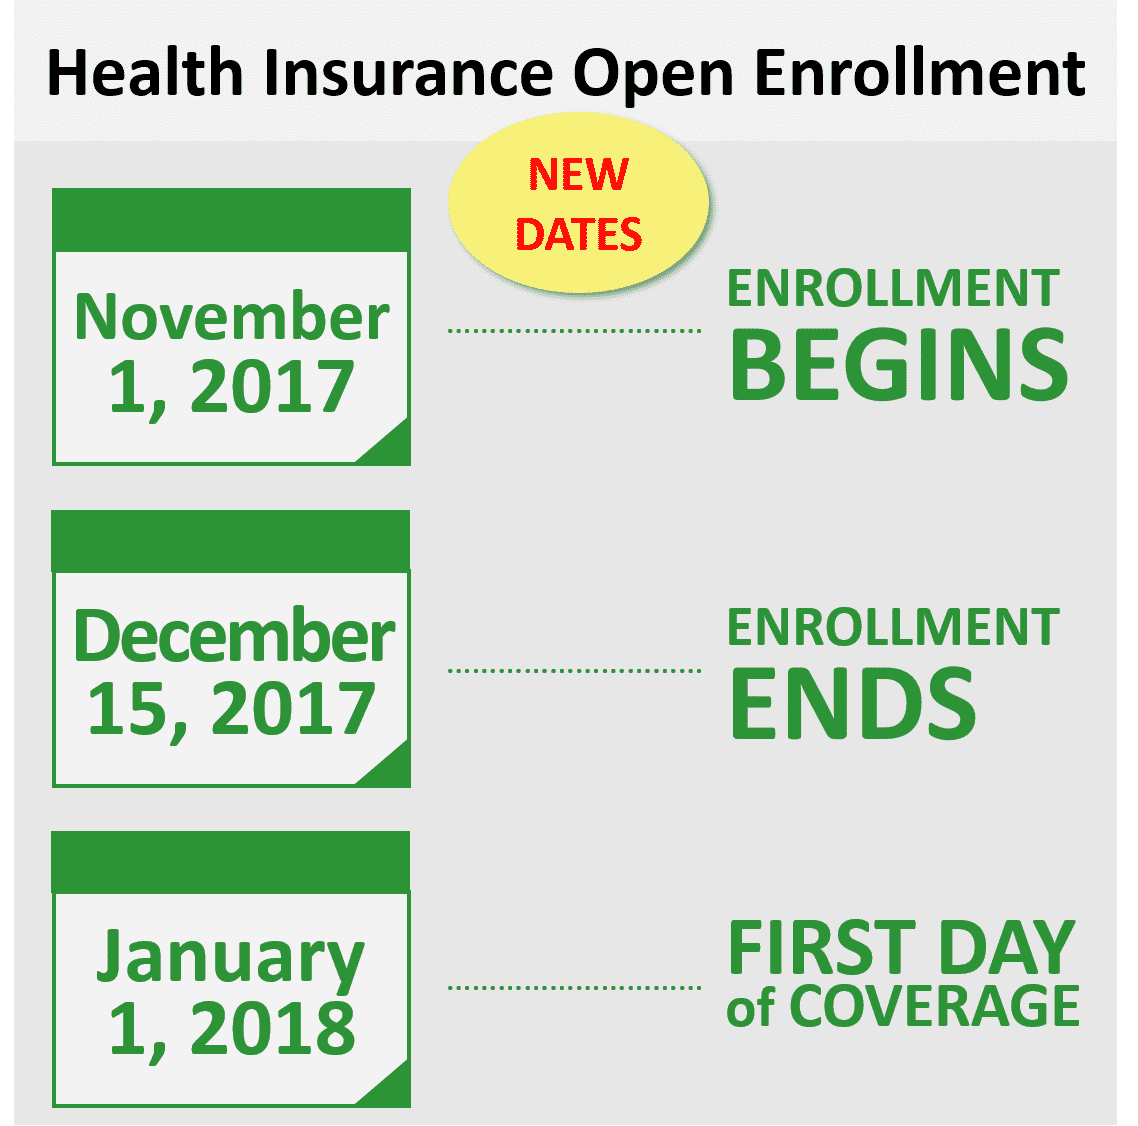 New Dates for the Upcoming Health Insurance Open Enrollment